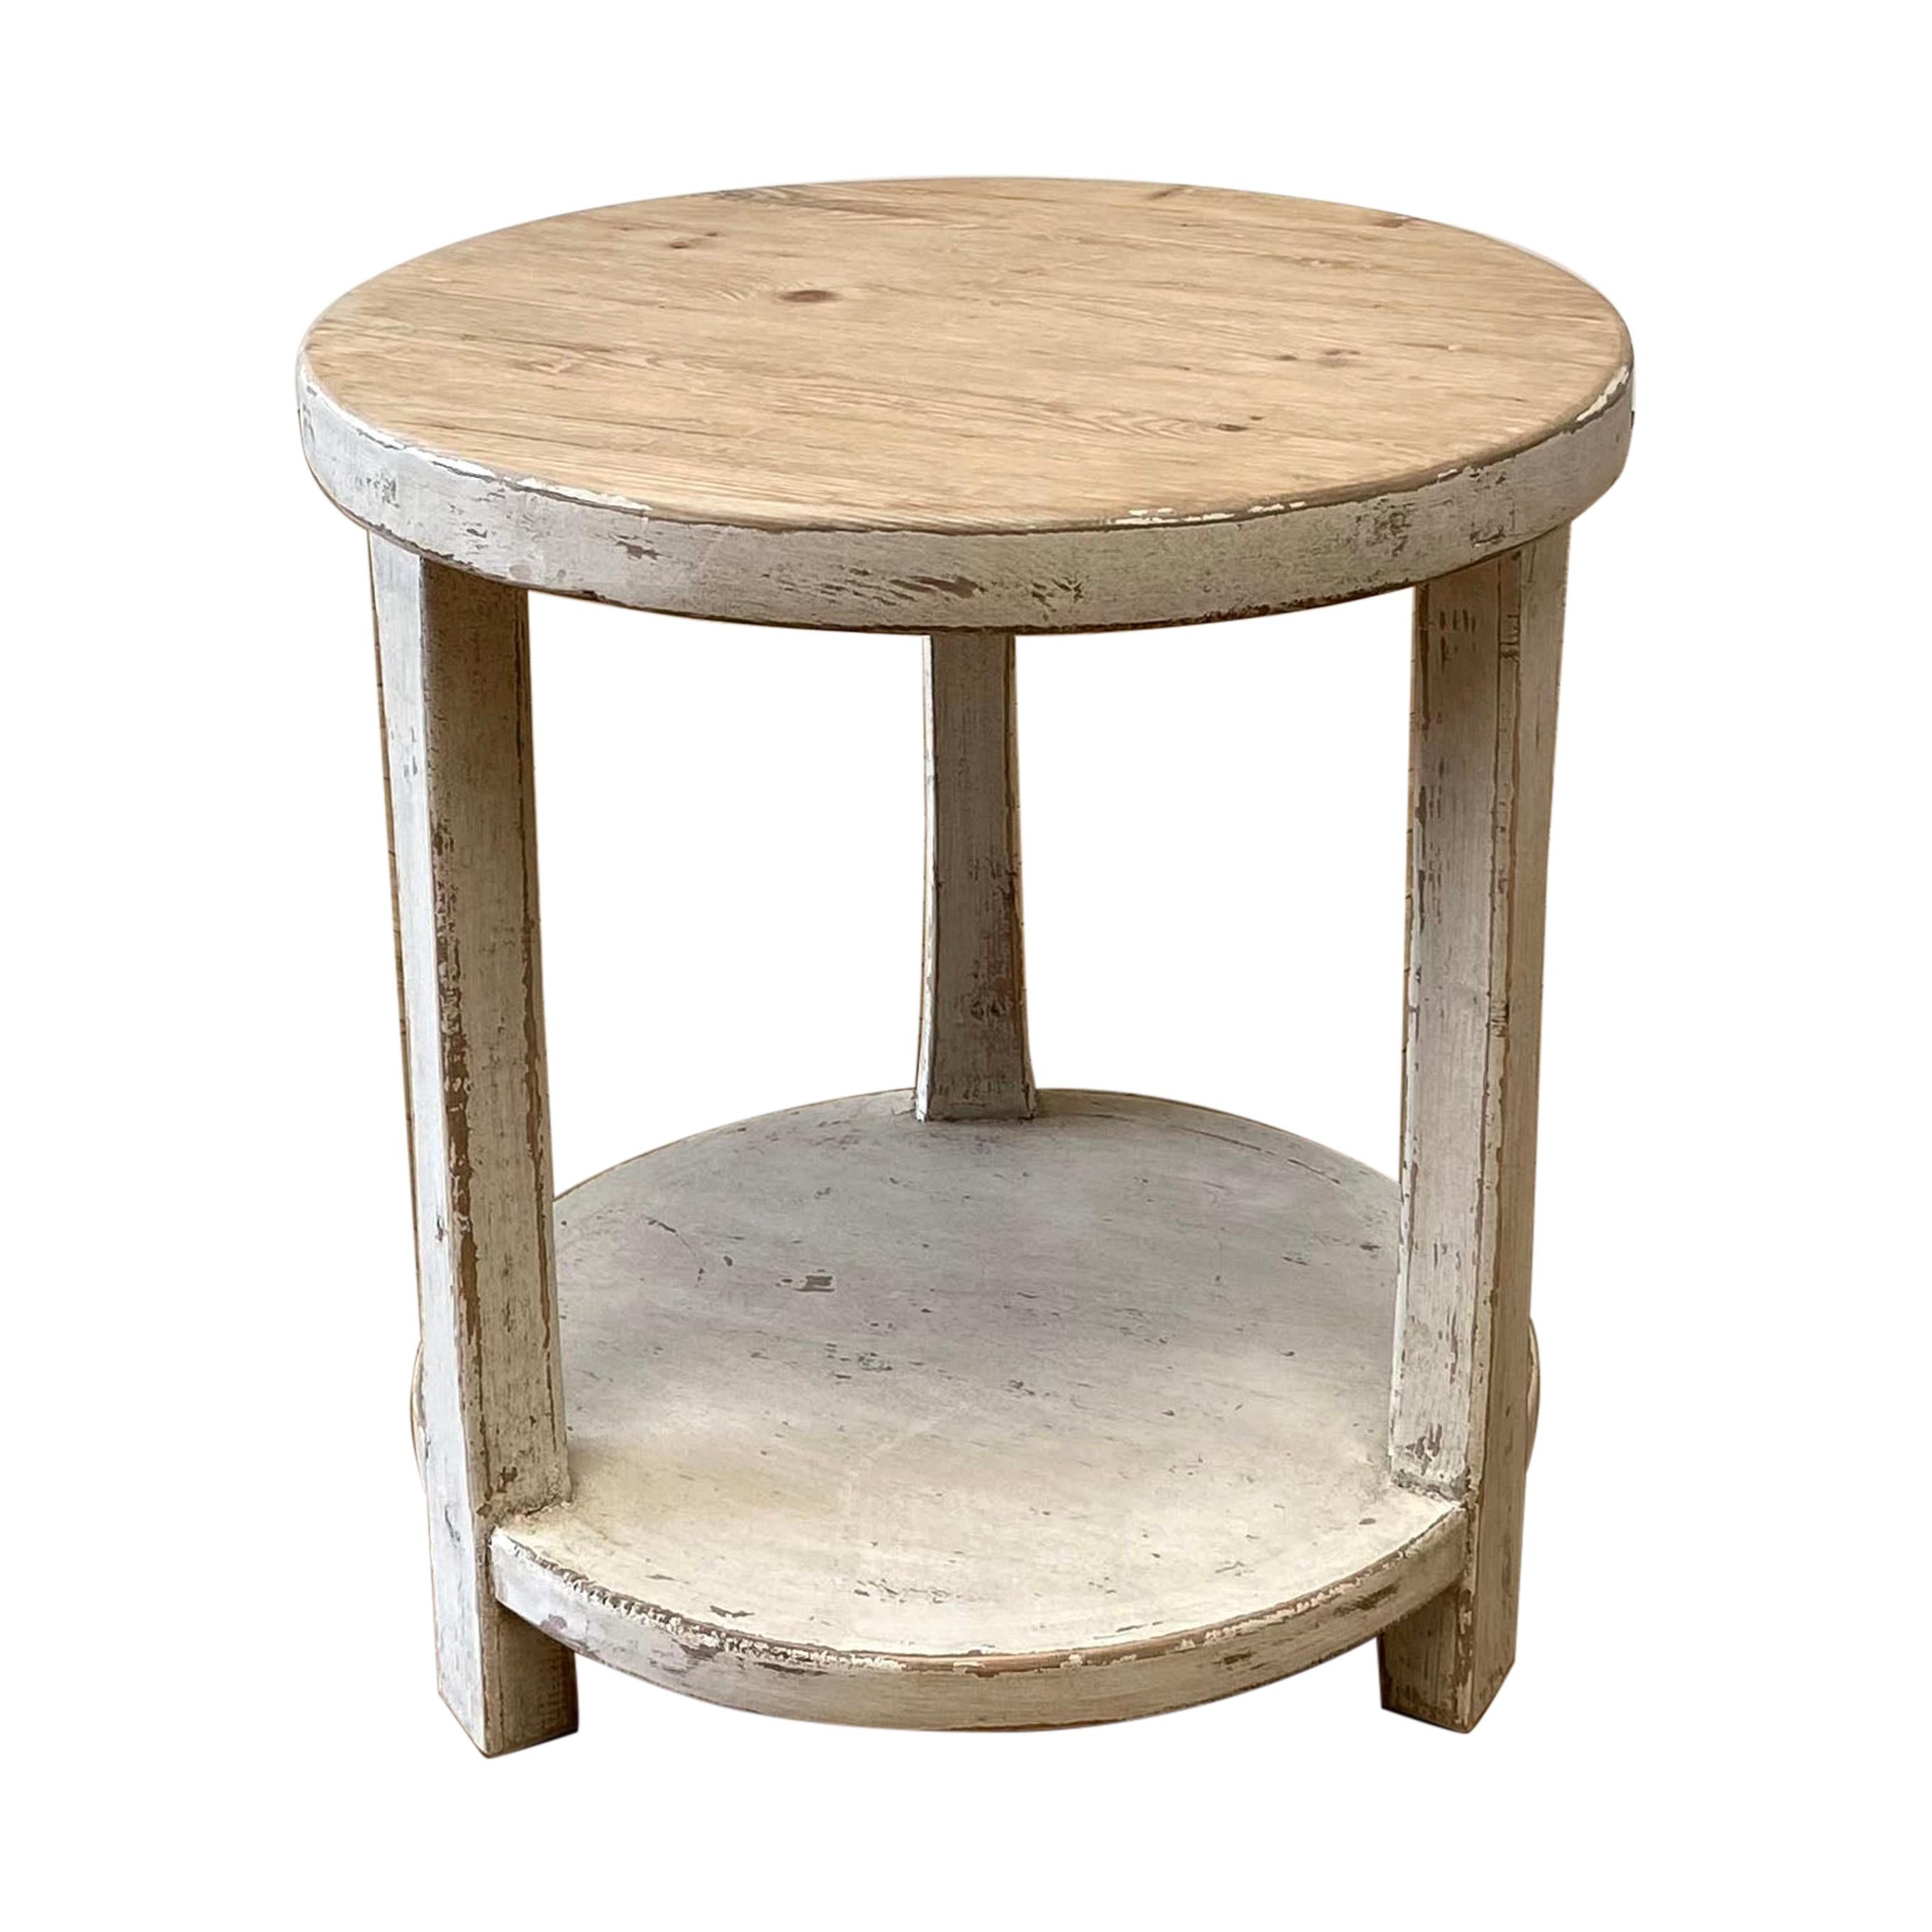 Reclaimed Pine Round Side Table with White Painted Legs